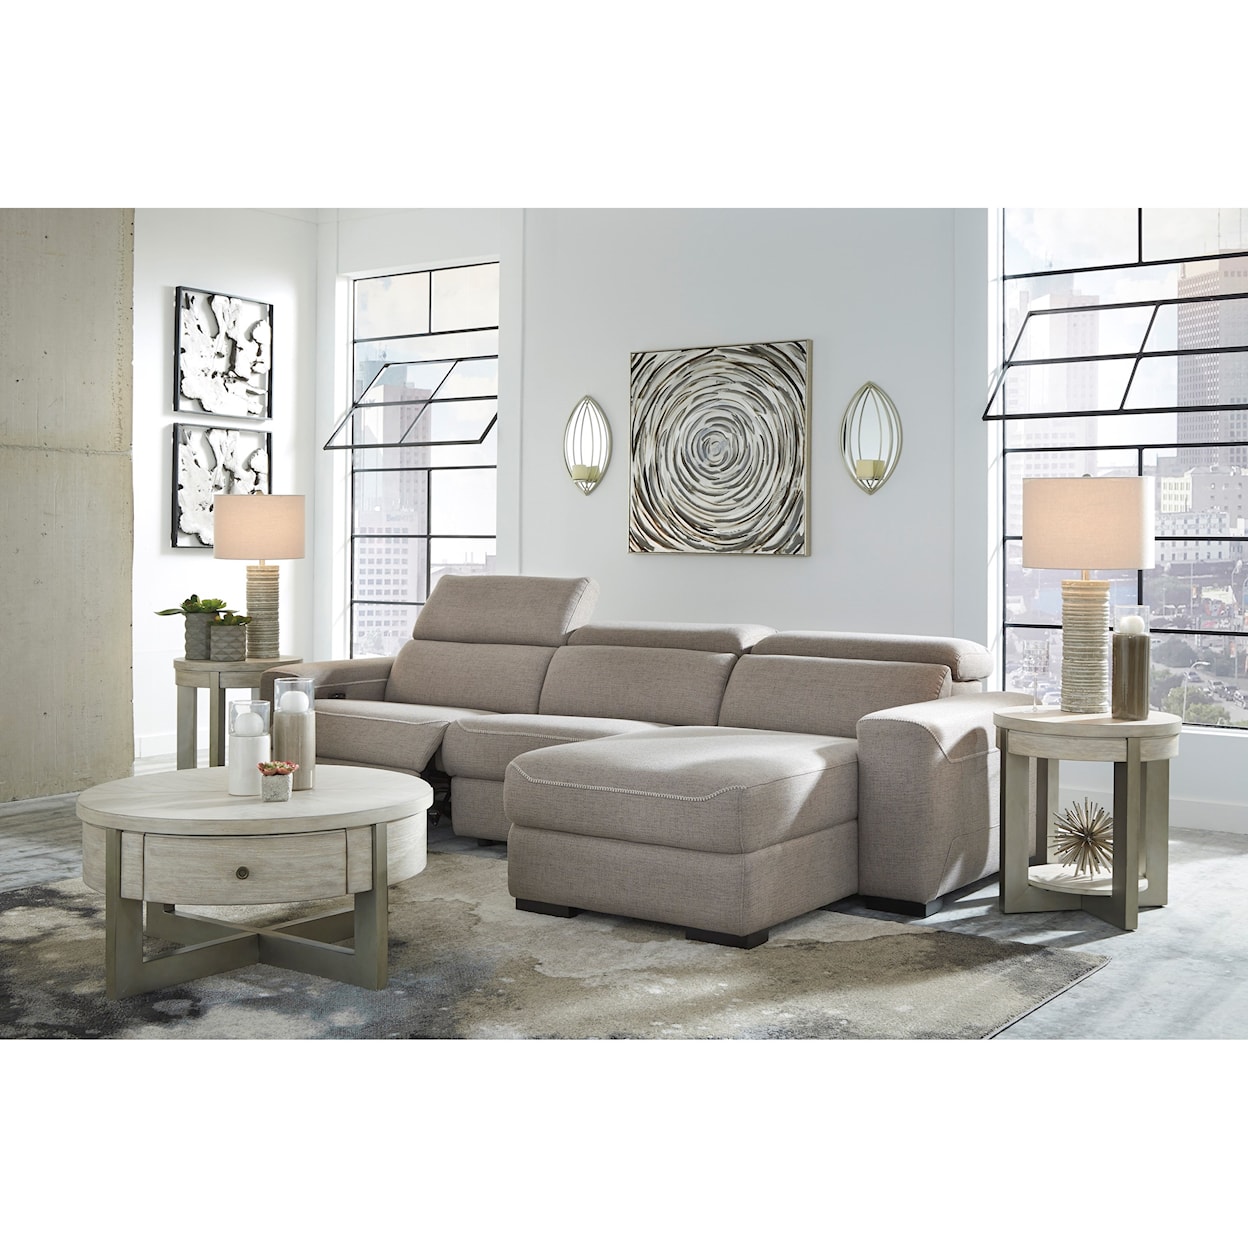 Signature Design by Ashley Mabton 3-Piece Power Reclining Sectional w/ Chaise